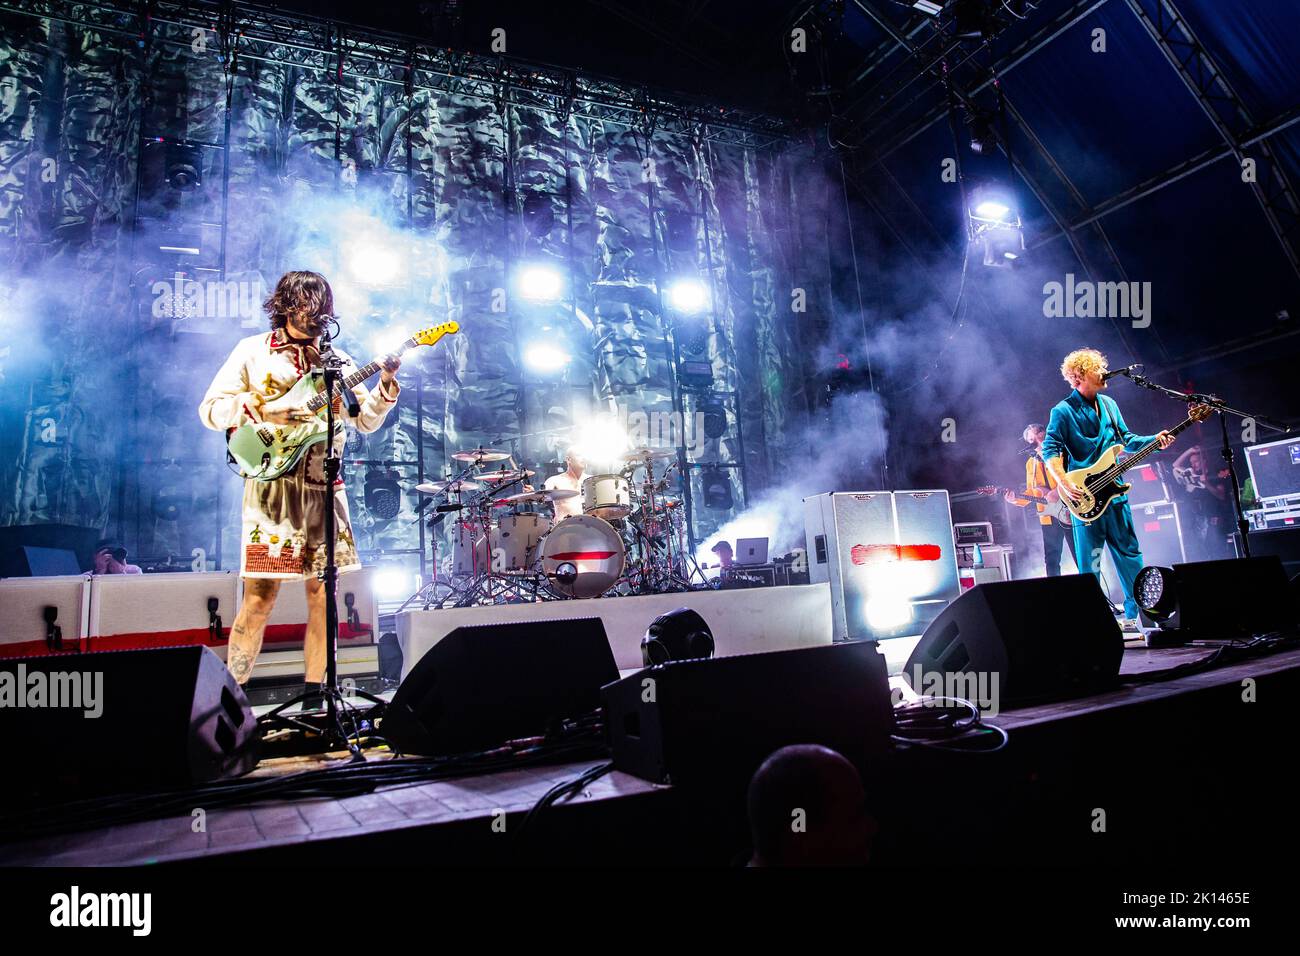 Milan Italy. 14 September 2022. The Scottish rock band BIFFY CLYRO performs live on stage at Carroponte. Stock Photo